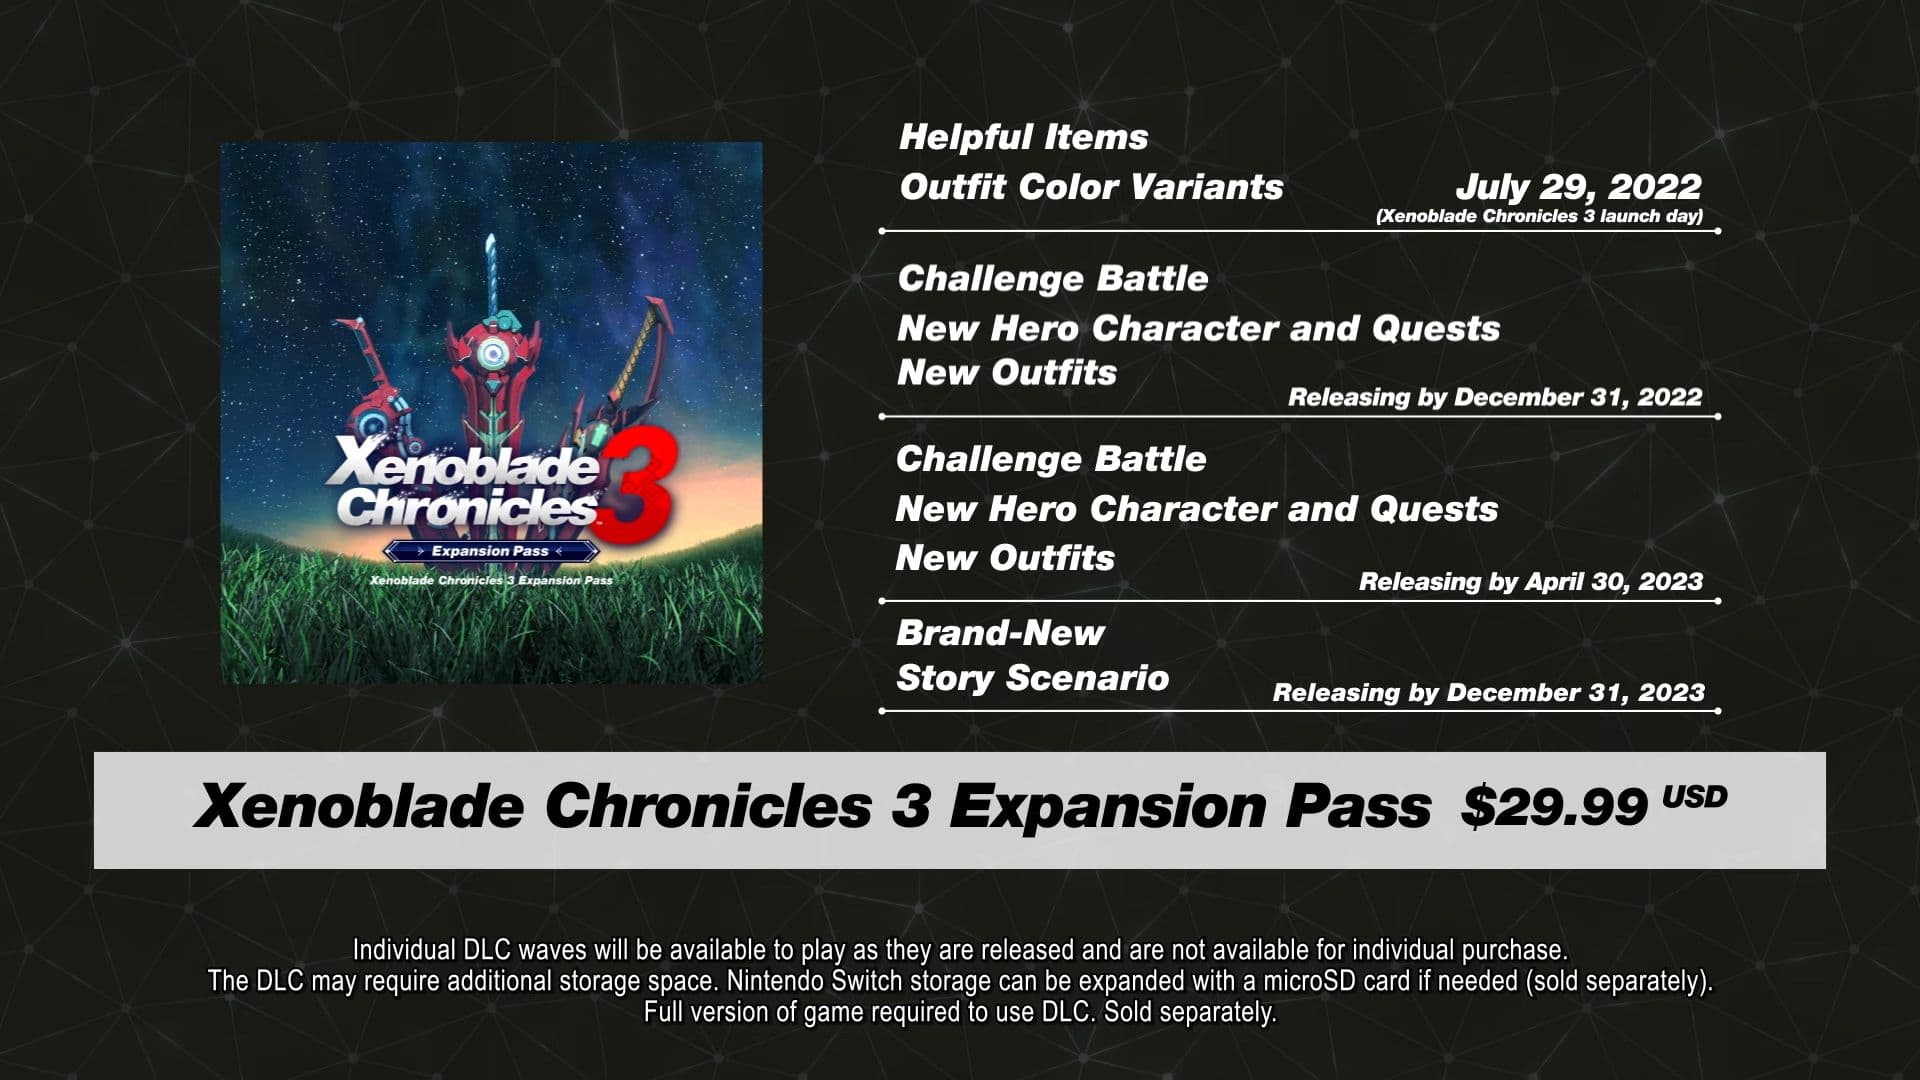 xenoblade chronicles 3 expansion pass min  Image of xenoblade chronicles 3 expansion pass min